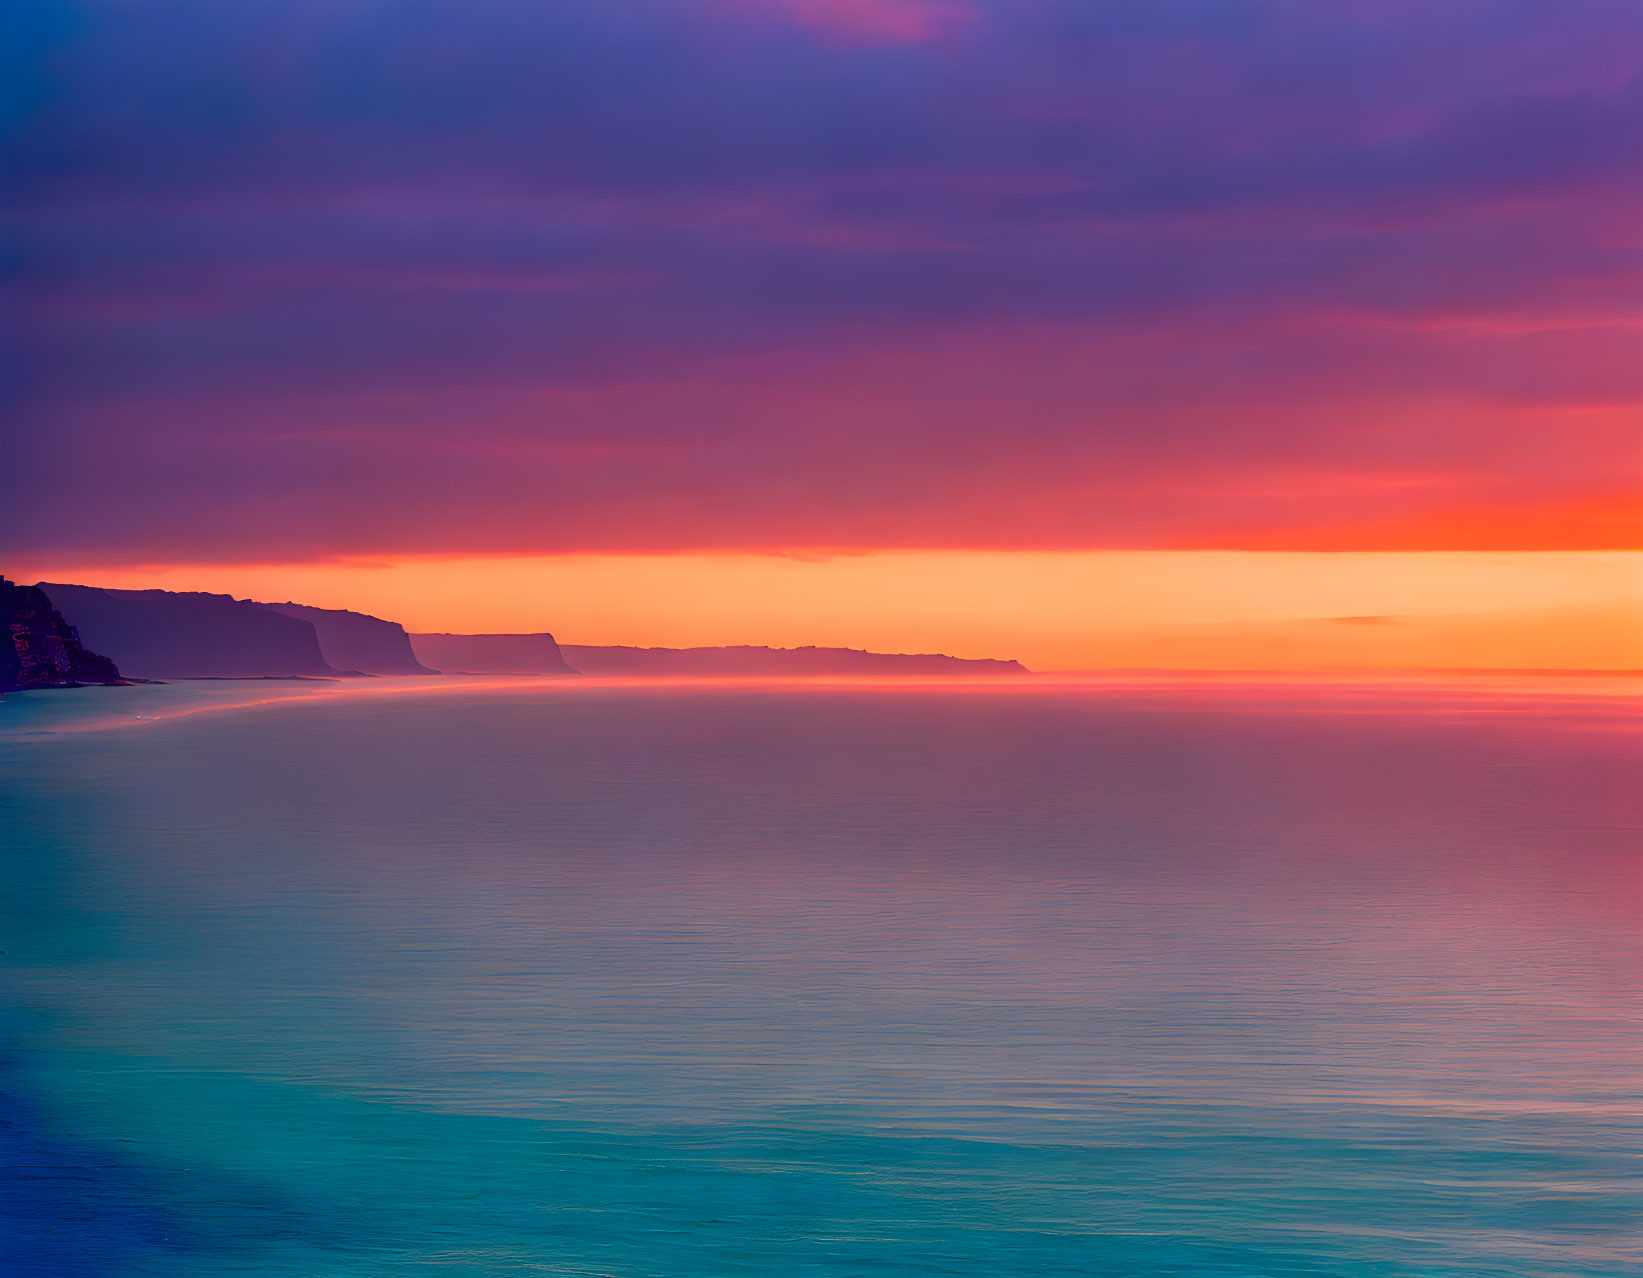 Tranquil seascape at sunset with vibrant purple, pink, and blue hues